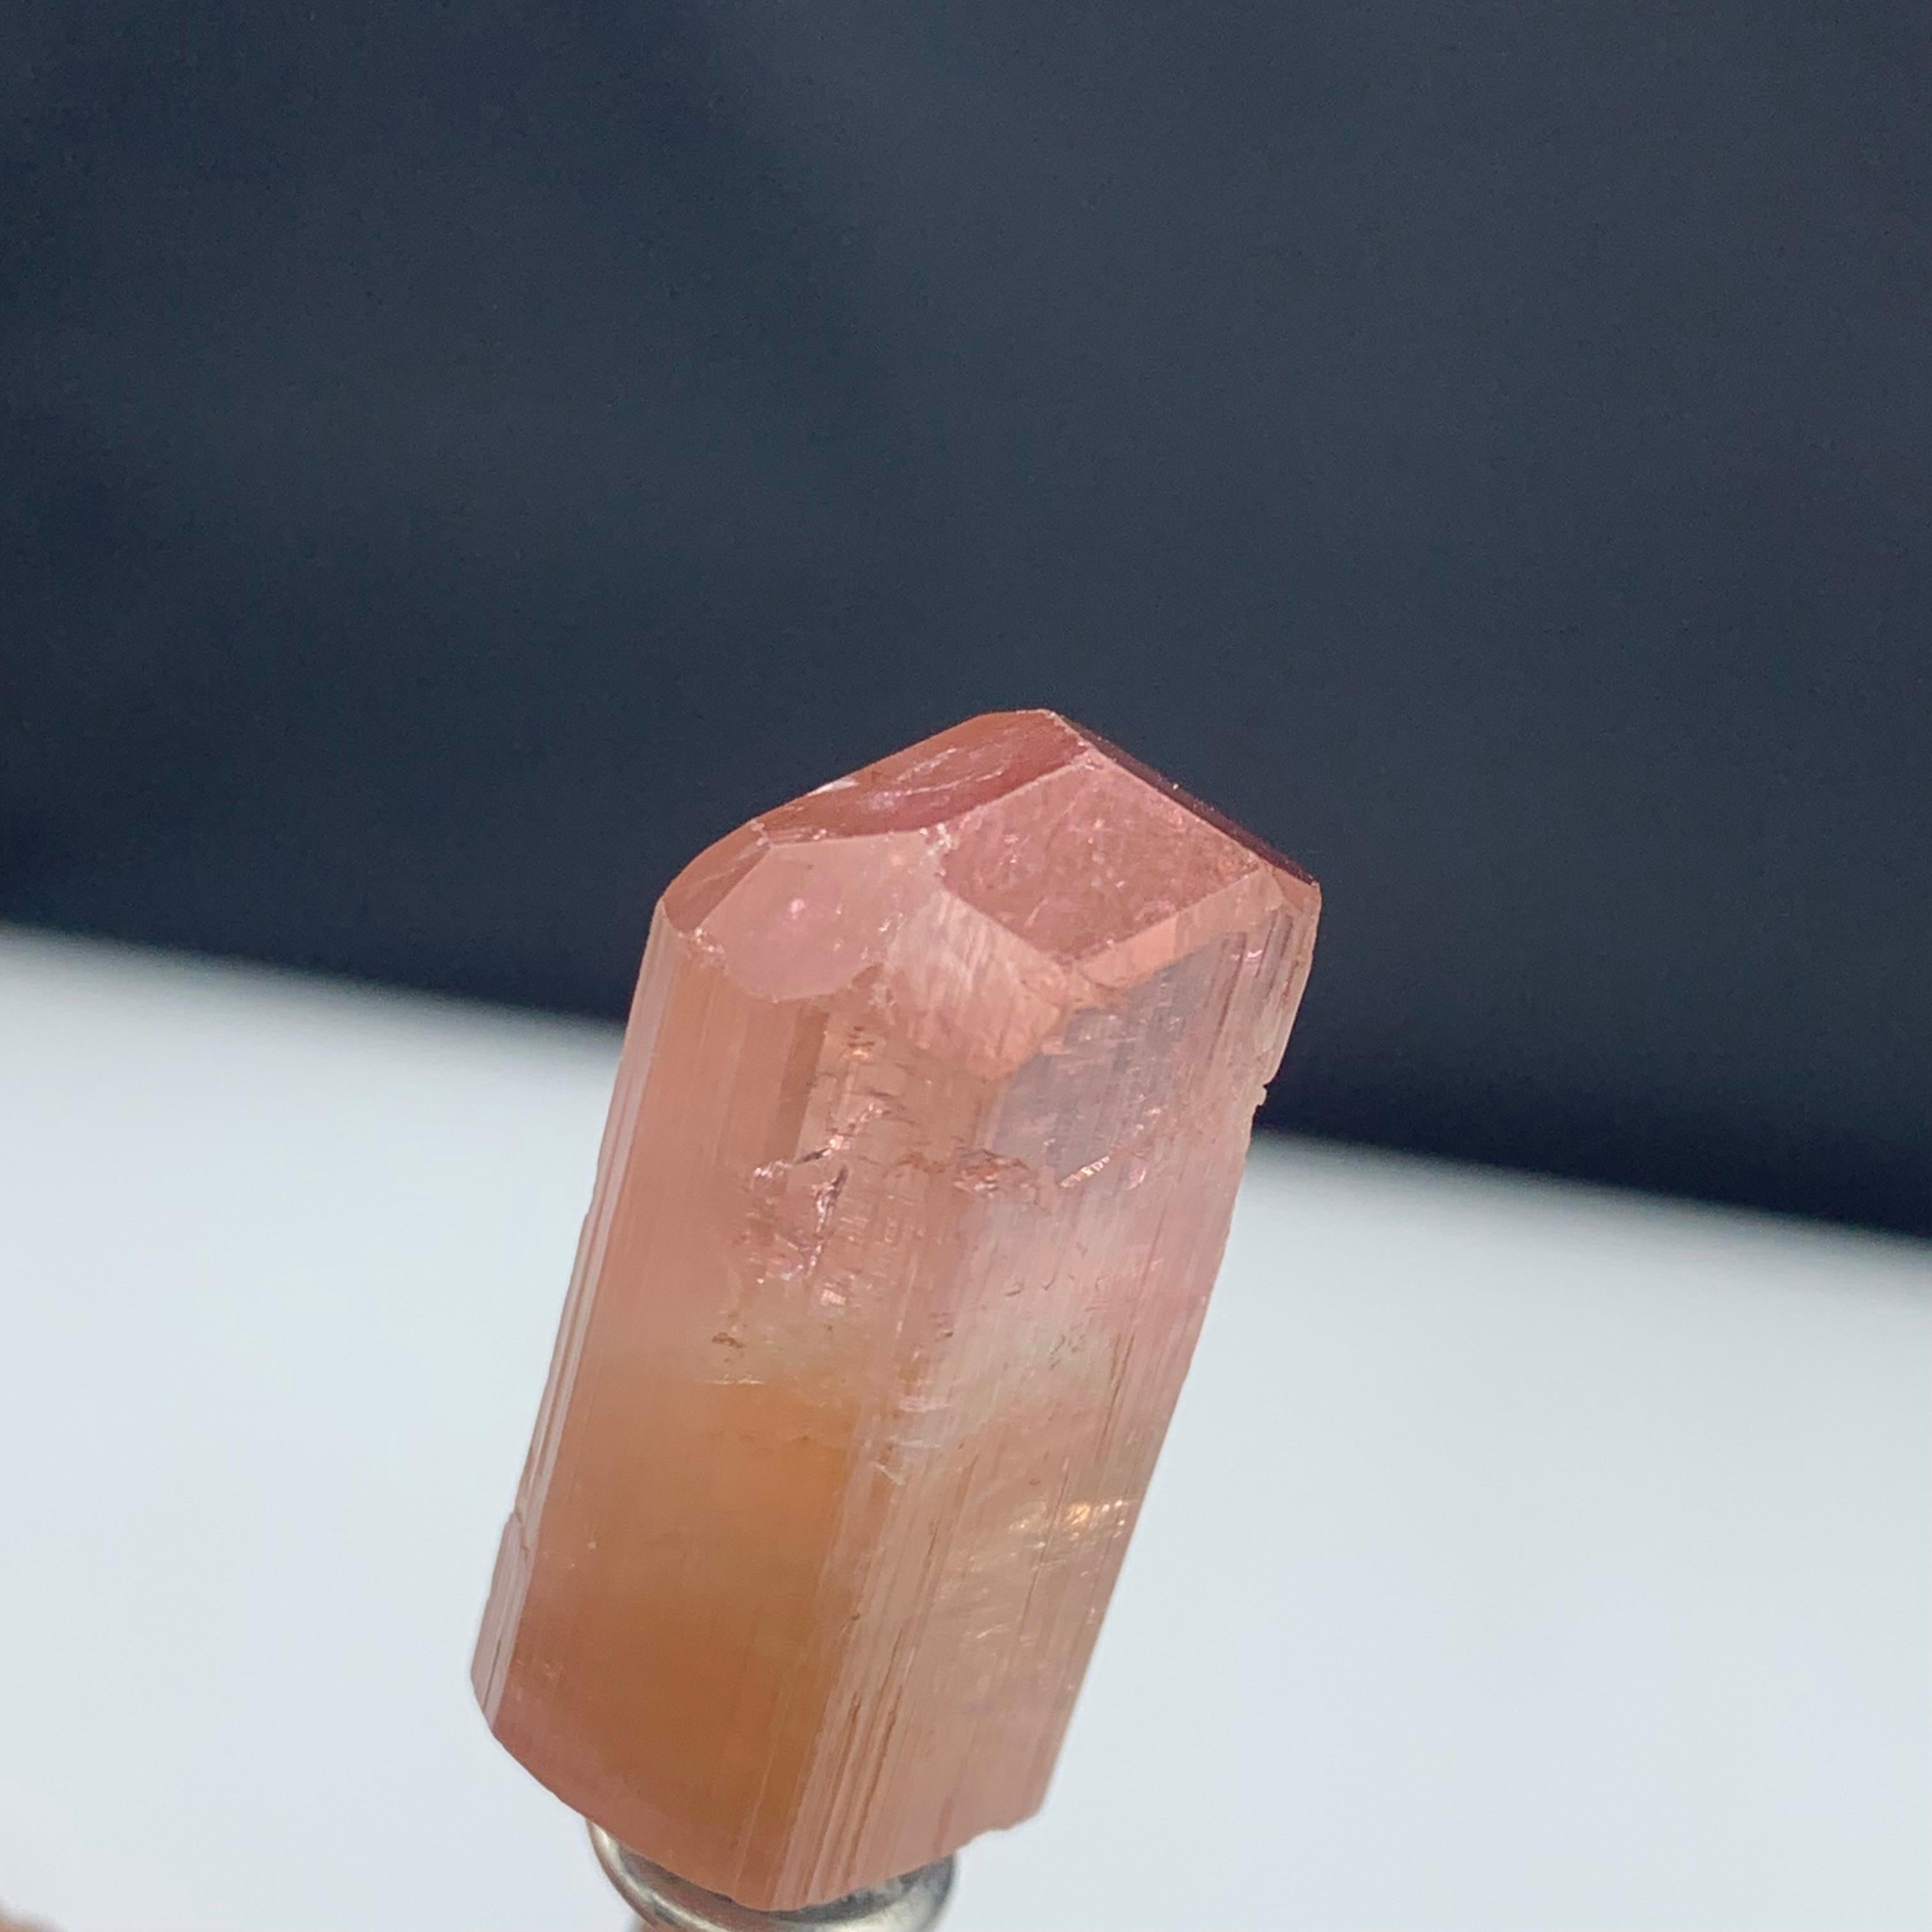 18th Century and Earlier 50.00 Carat Amazing Peach Color Terminated Tourmaline Crystal From Afghanistan For Sale